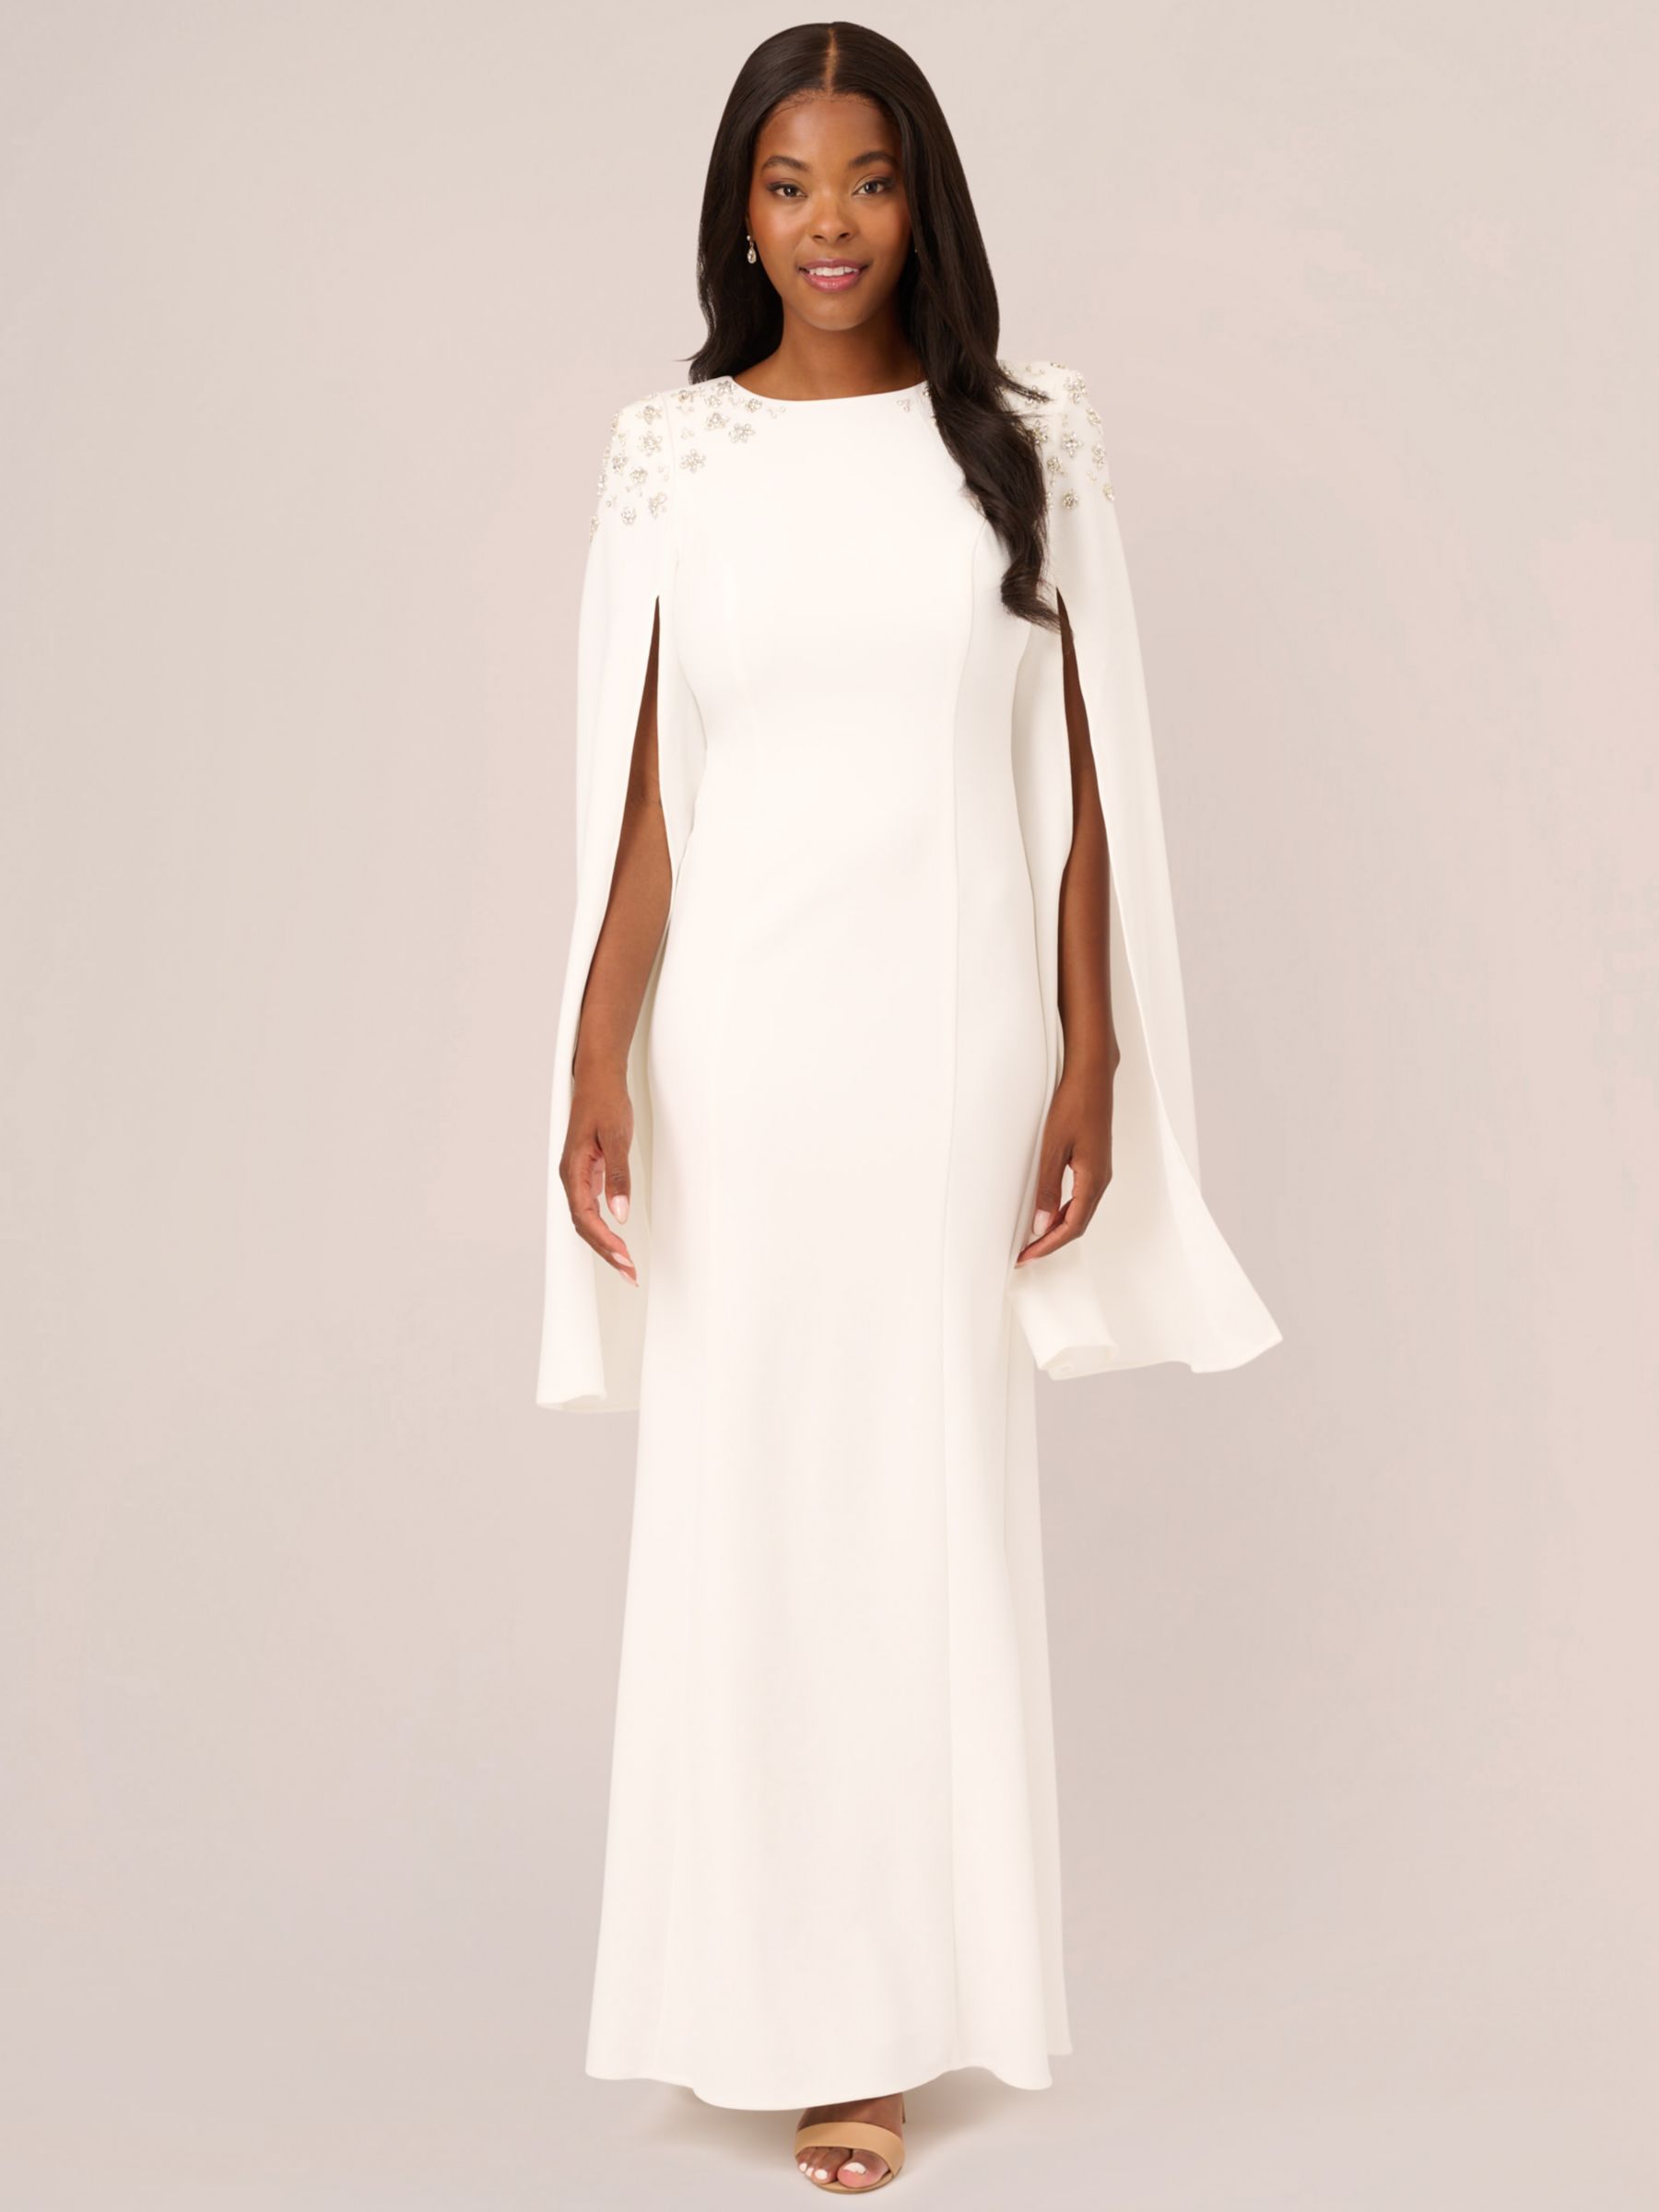 Adrianna Papell Crepe Beaded Cape Sleeve Gown, Ivory at John Lewis ...